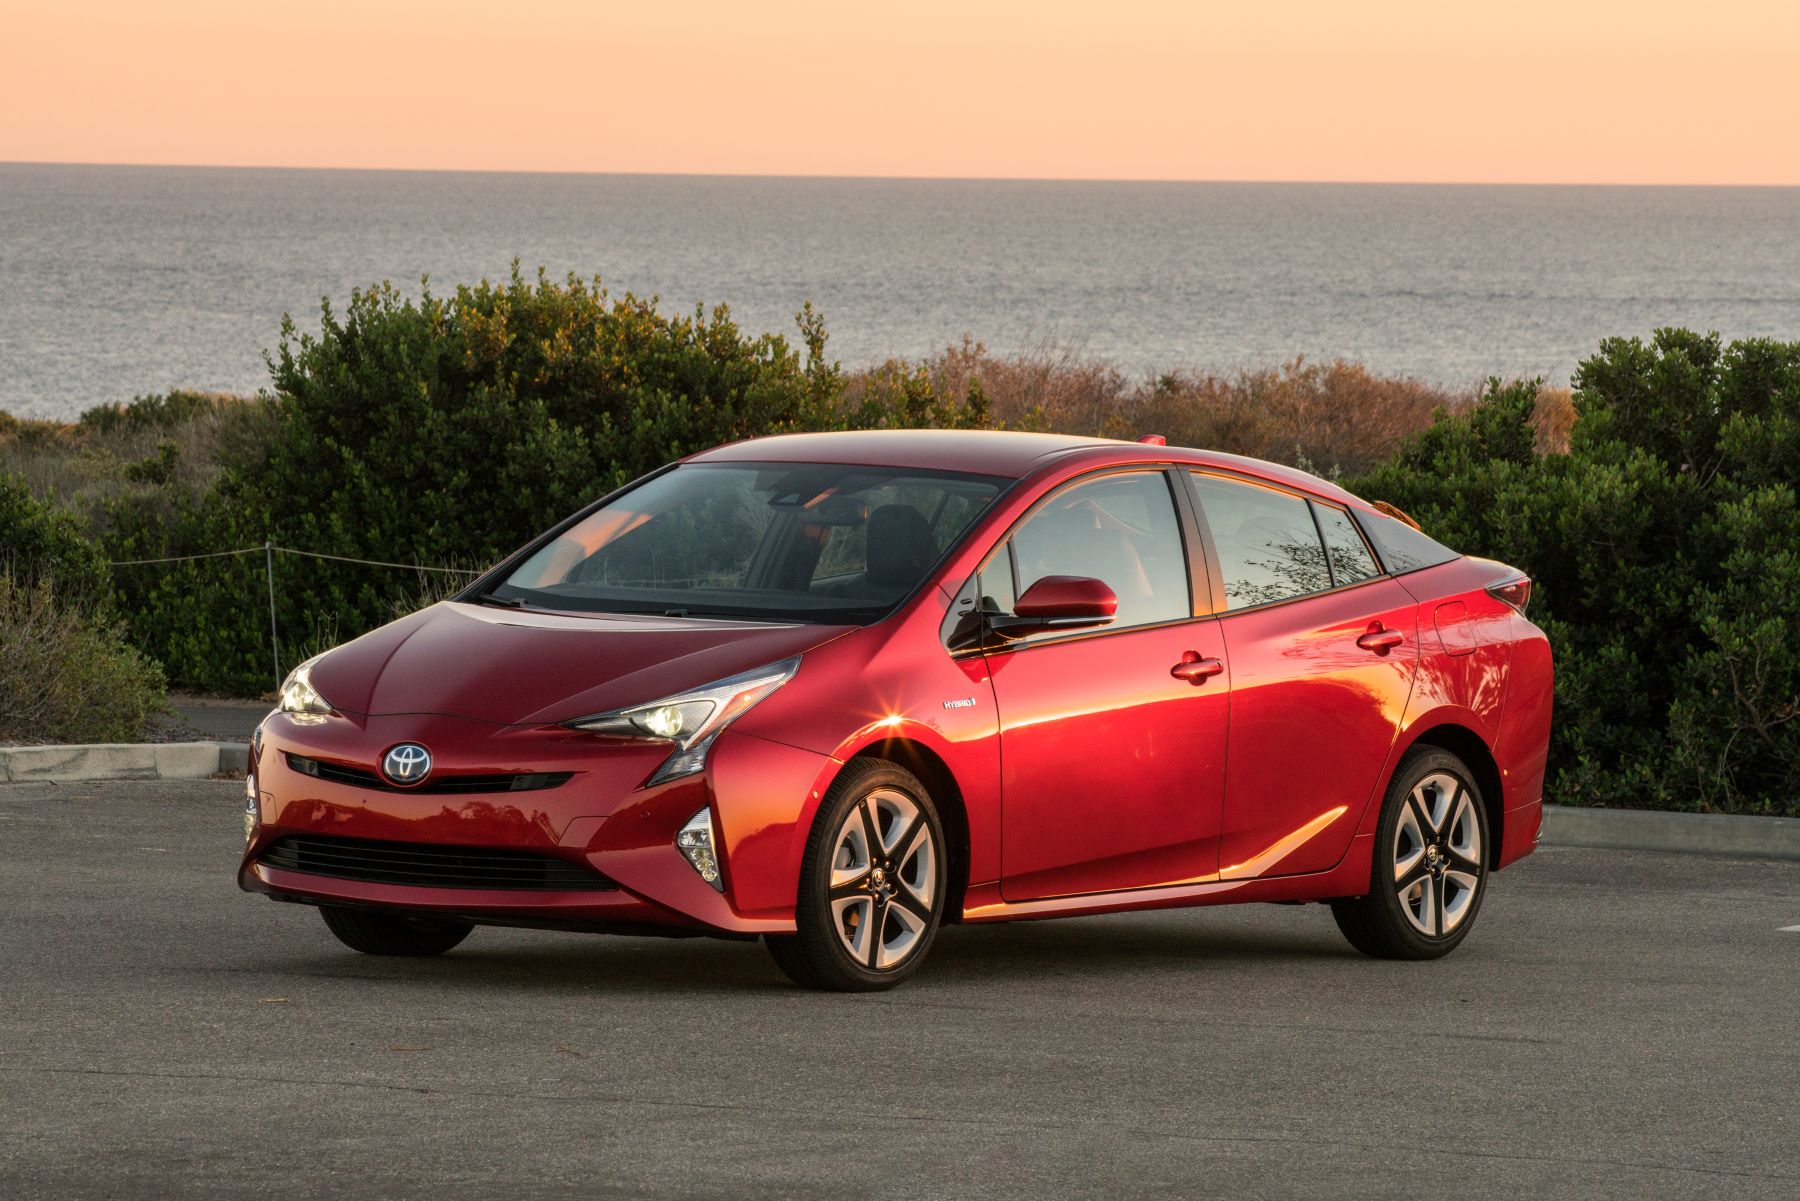 2016-2018 Toyota Prius Four Touring hybrid hatchback model in red